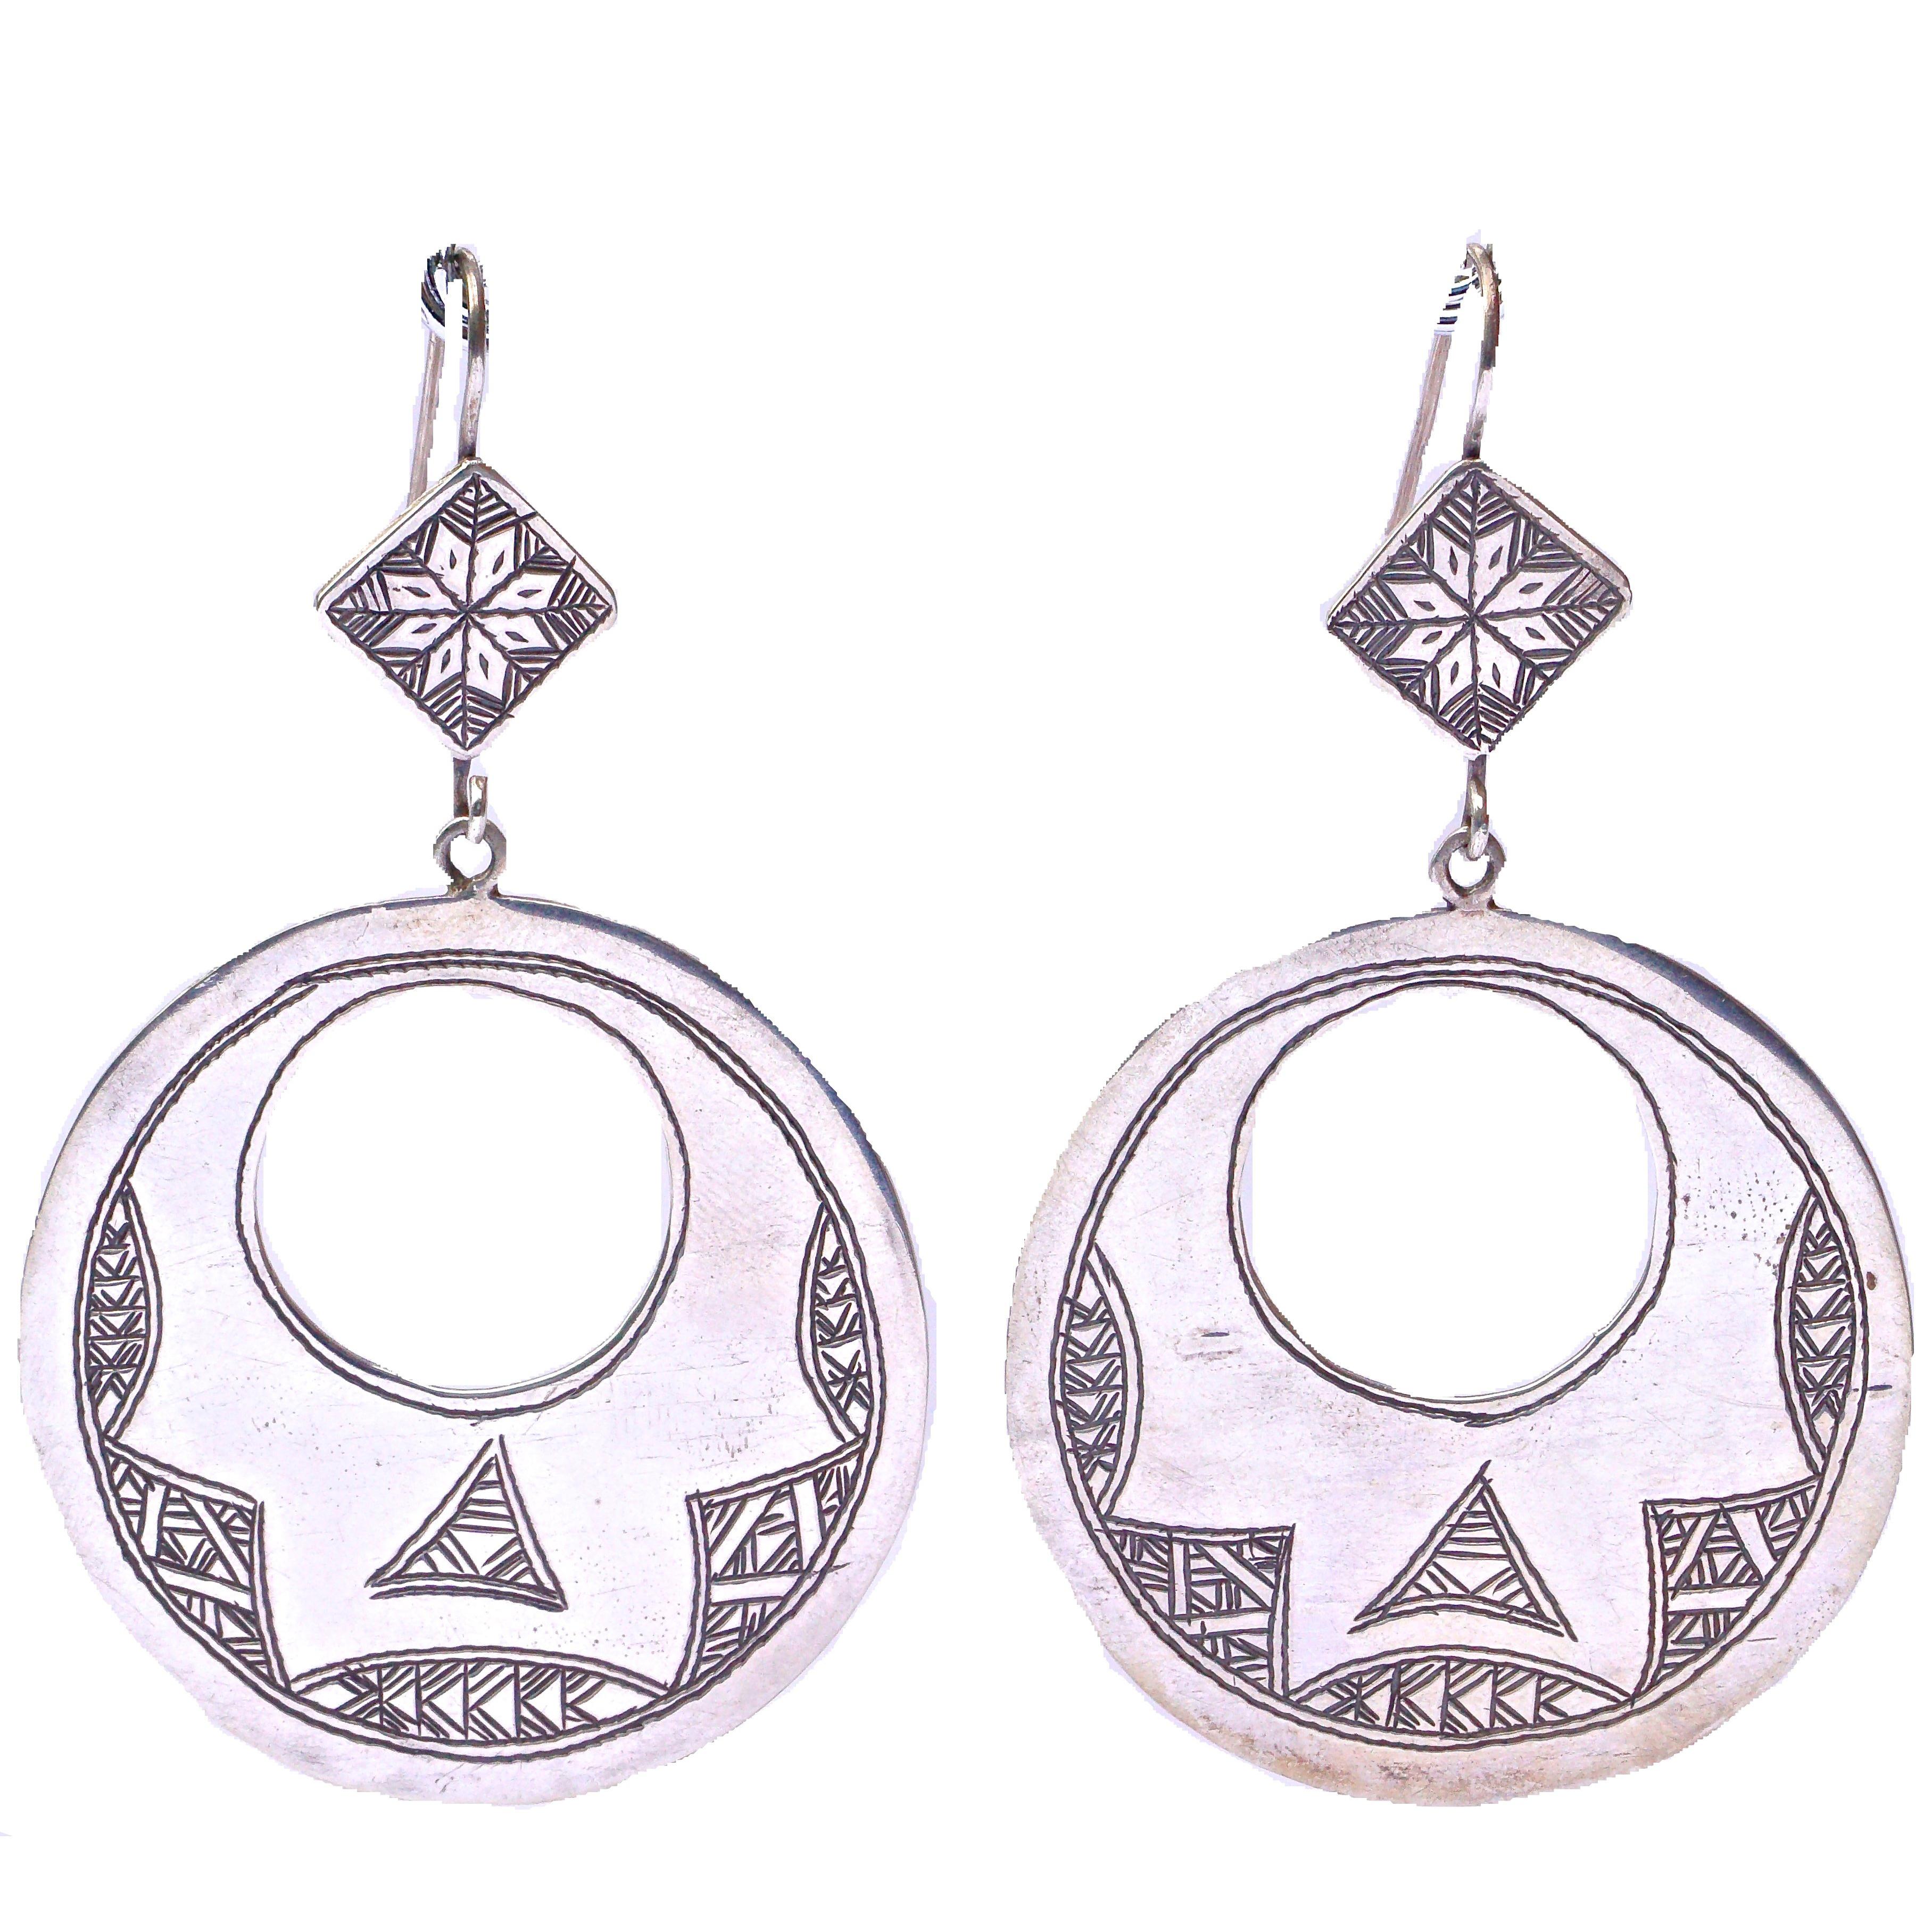 Large Berber Silver Moroccan Cut Out Round and Diamond Shaped Drop Hoop Earrings